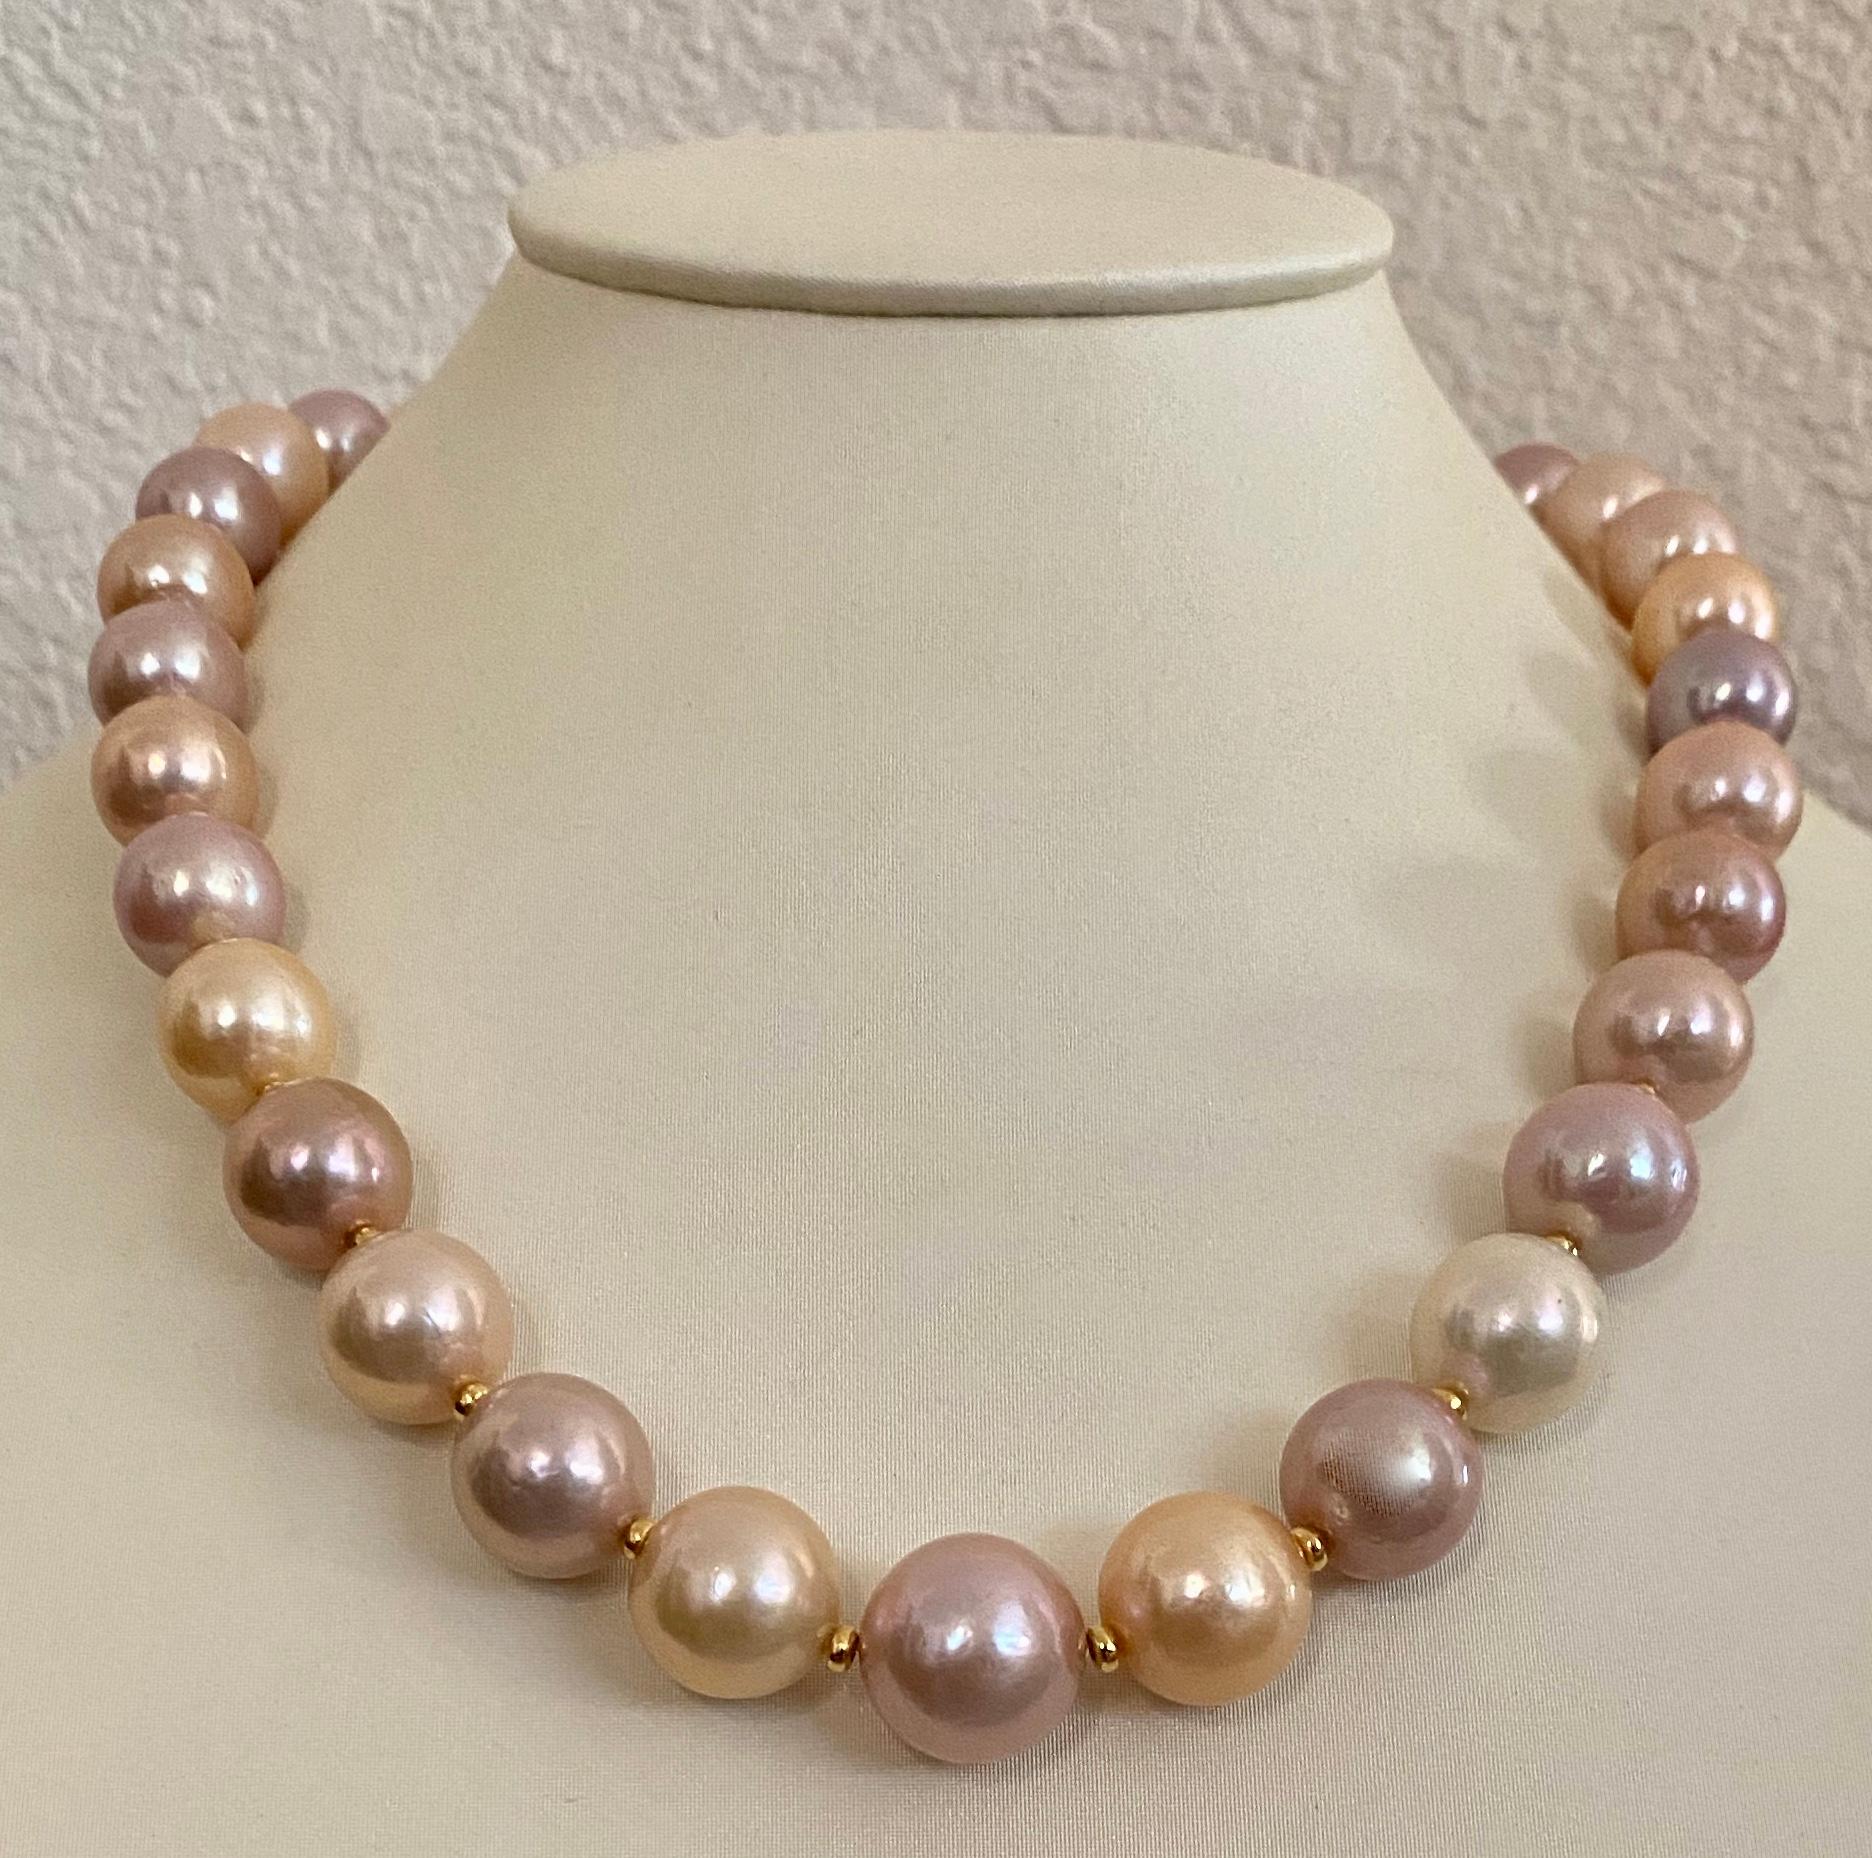 Freshwater pearls in shades of peach, lavender, cream and pink are mixed together to form this superb necklace.  The huge 32 pearls (origin: China) are slightly graduated in size from 1/2 inch to 5/8 inches.  They are blemish free and have rich